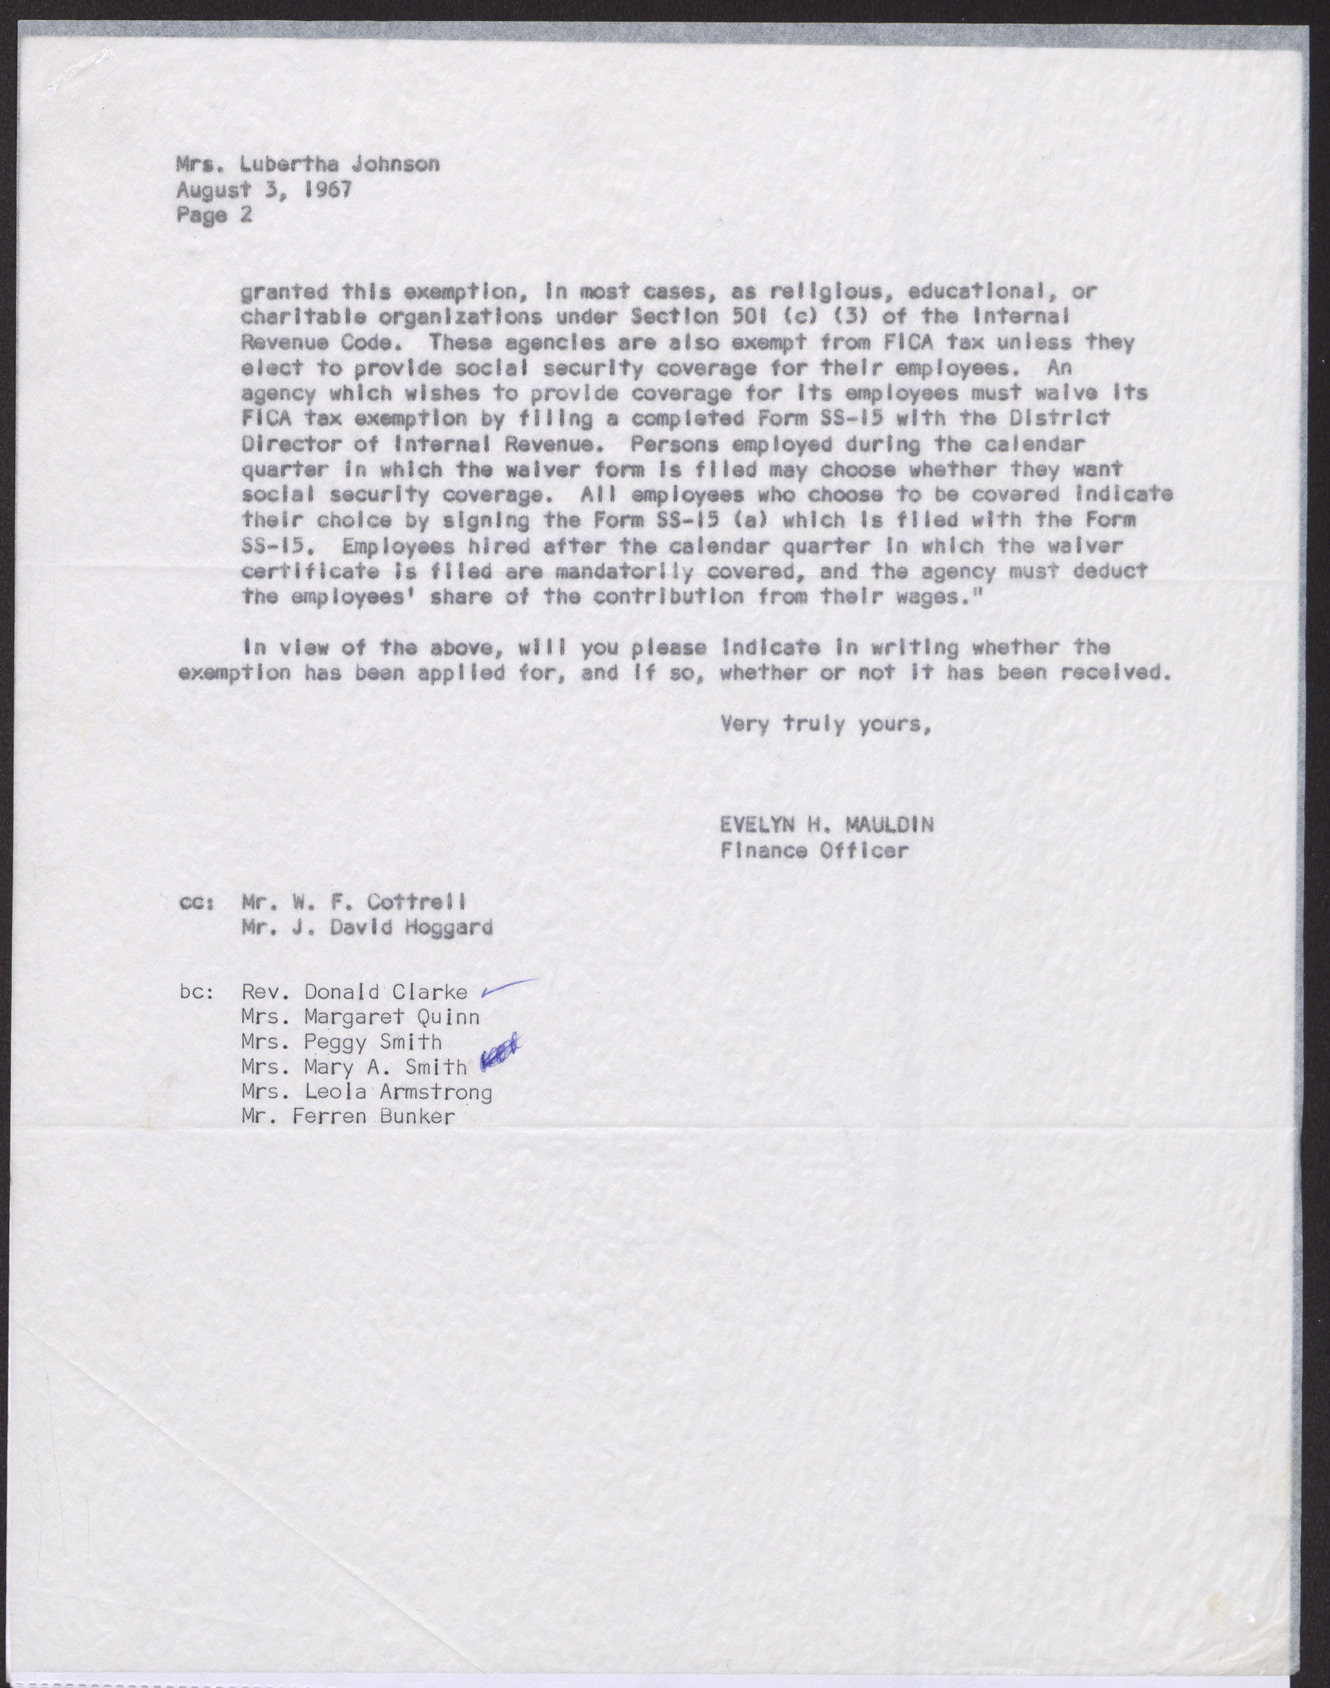 Letter to Mrs. Lubertha Johnson from Evelyn H. Maudlin (2 pages), August 3, 1967, page 2